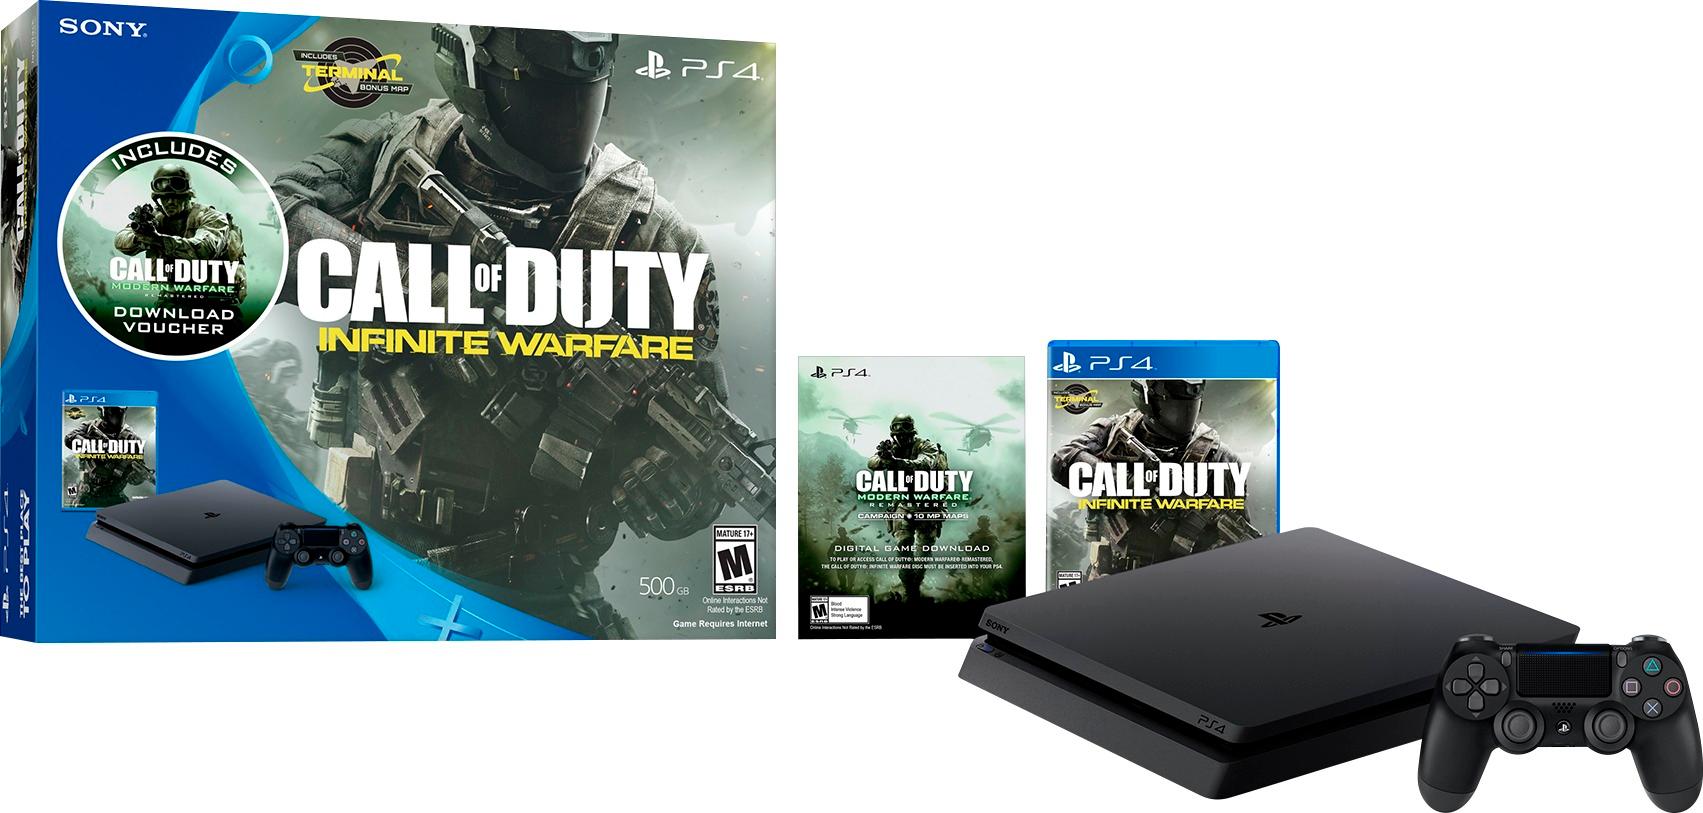 playstation 4 and call of duty bundle